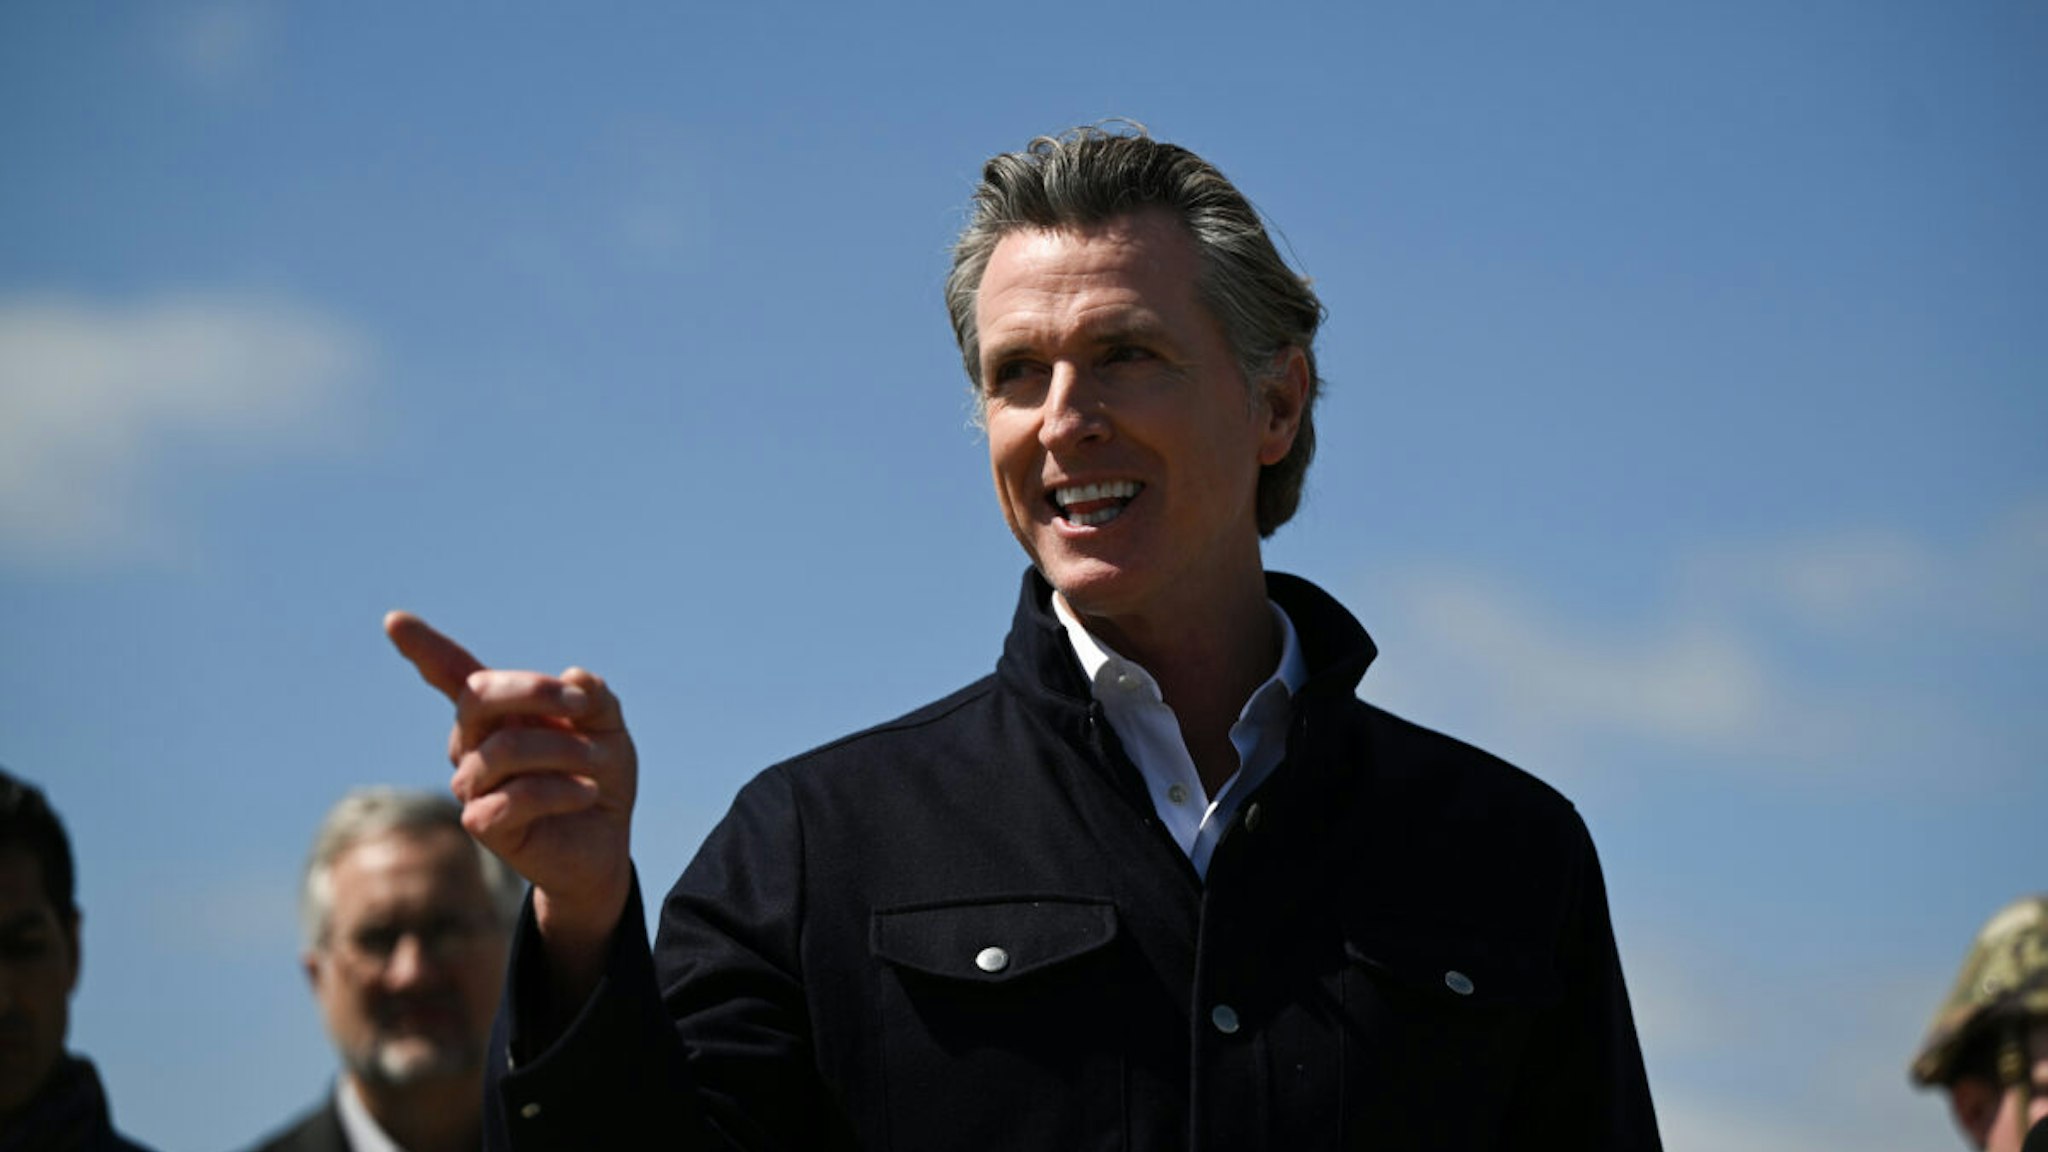 Gov. Gavin Newsom holds press conference near Pajaro flooding after he toured damaged areas in Pajaro of Monterey County, California, United States on March 15, 2023 as atmospheric river storms hit California.